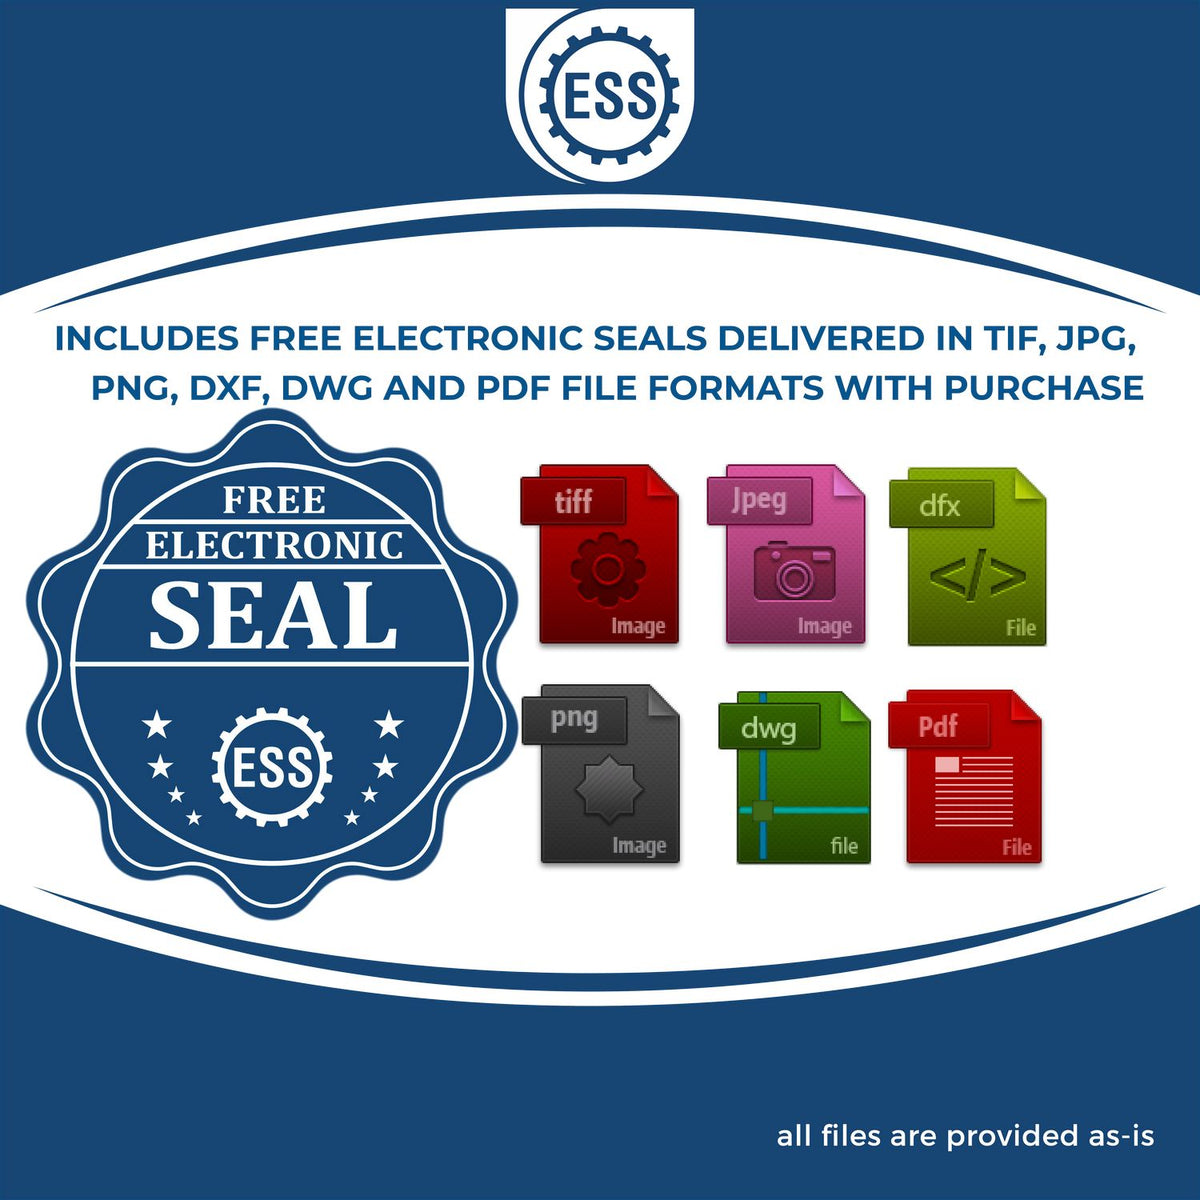 An infographic for the free electronic seal for the Gift Delaware Land Surveyor Seal illustrating the different file type icons such as DXF, DWG, TIF, JPG and PNG.